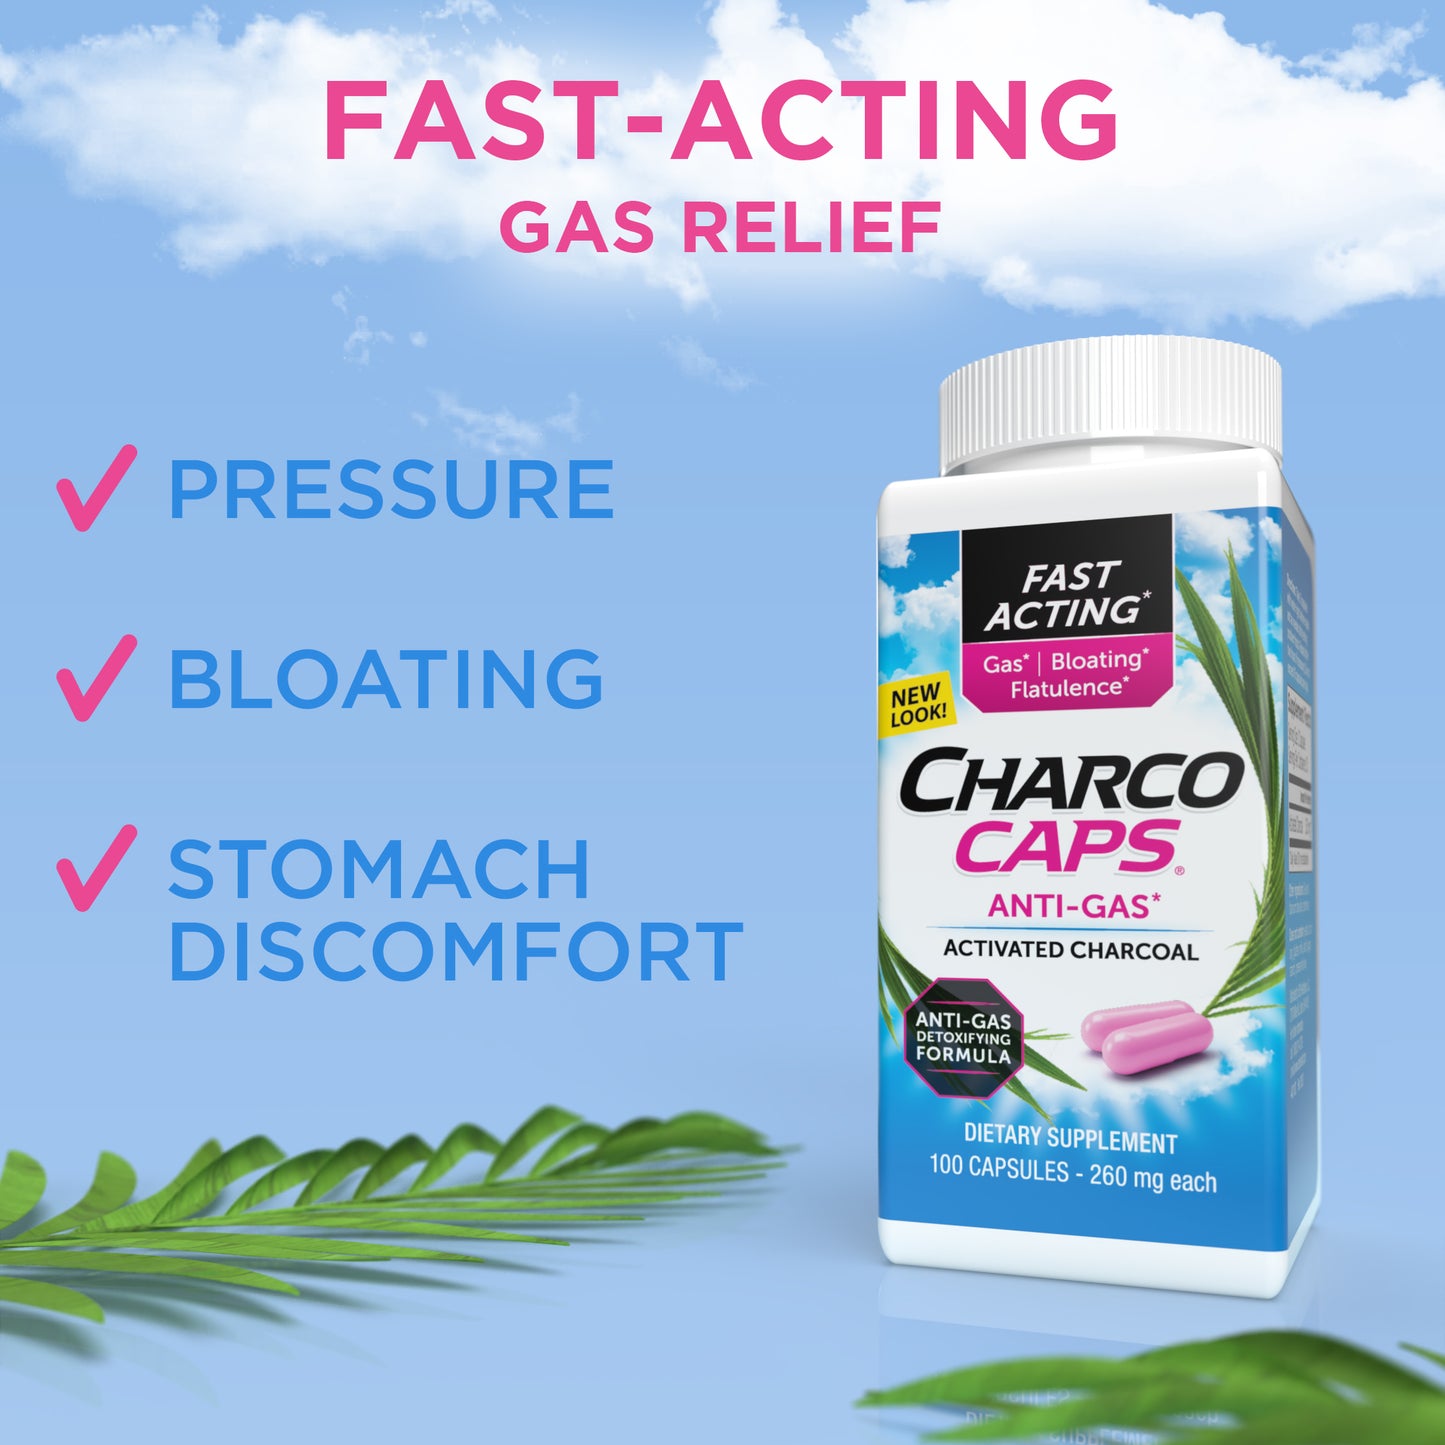 CharcoCaps Activated Charcoal Detoxifying Gas Relief 100 Count Capsules